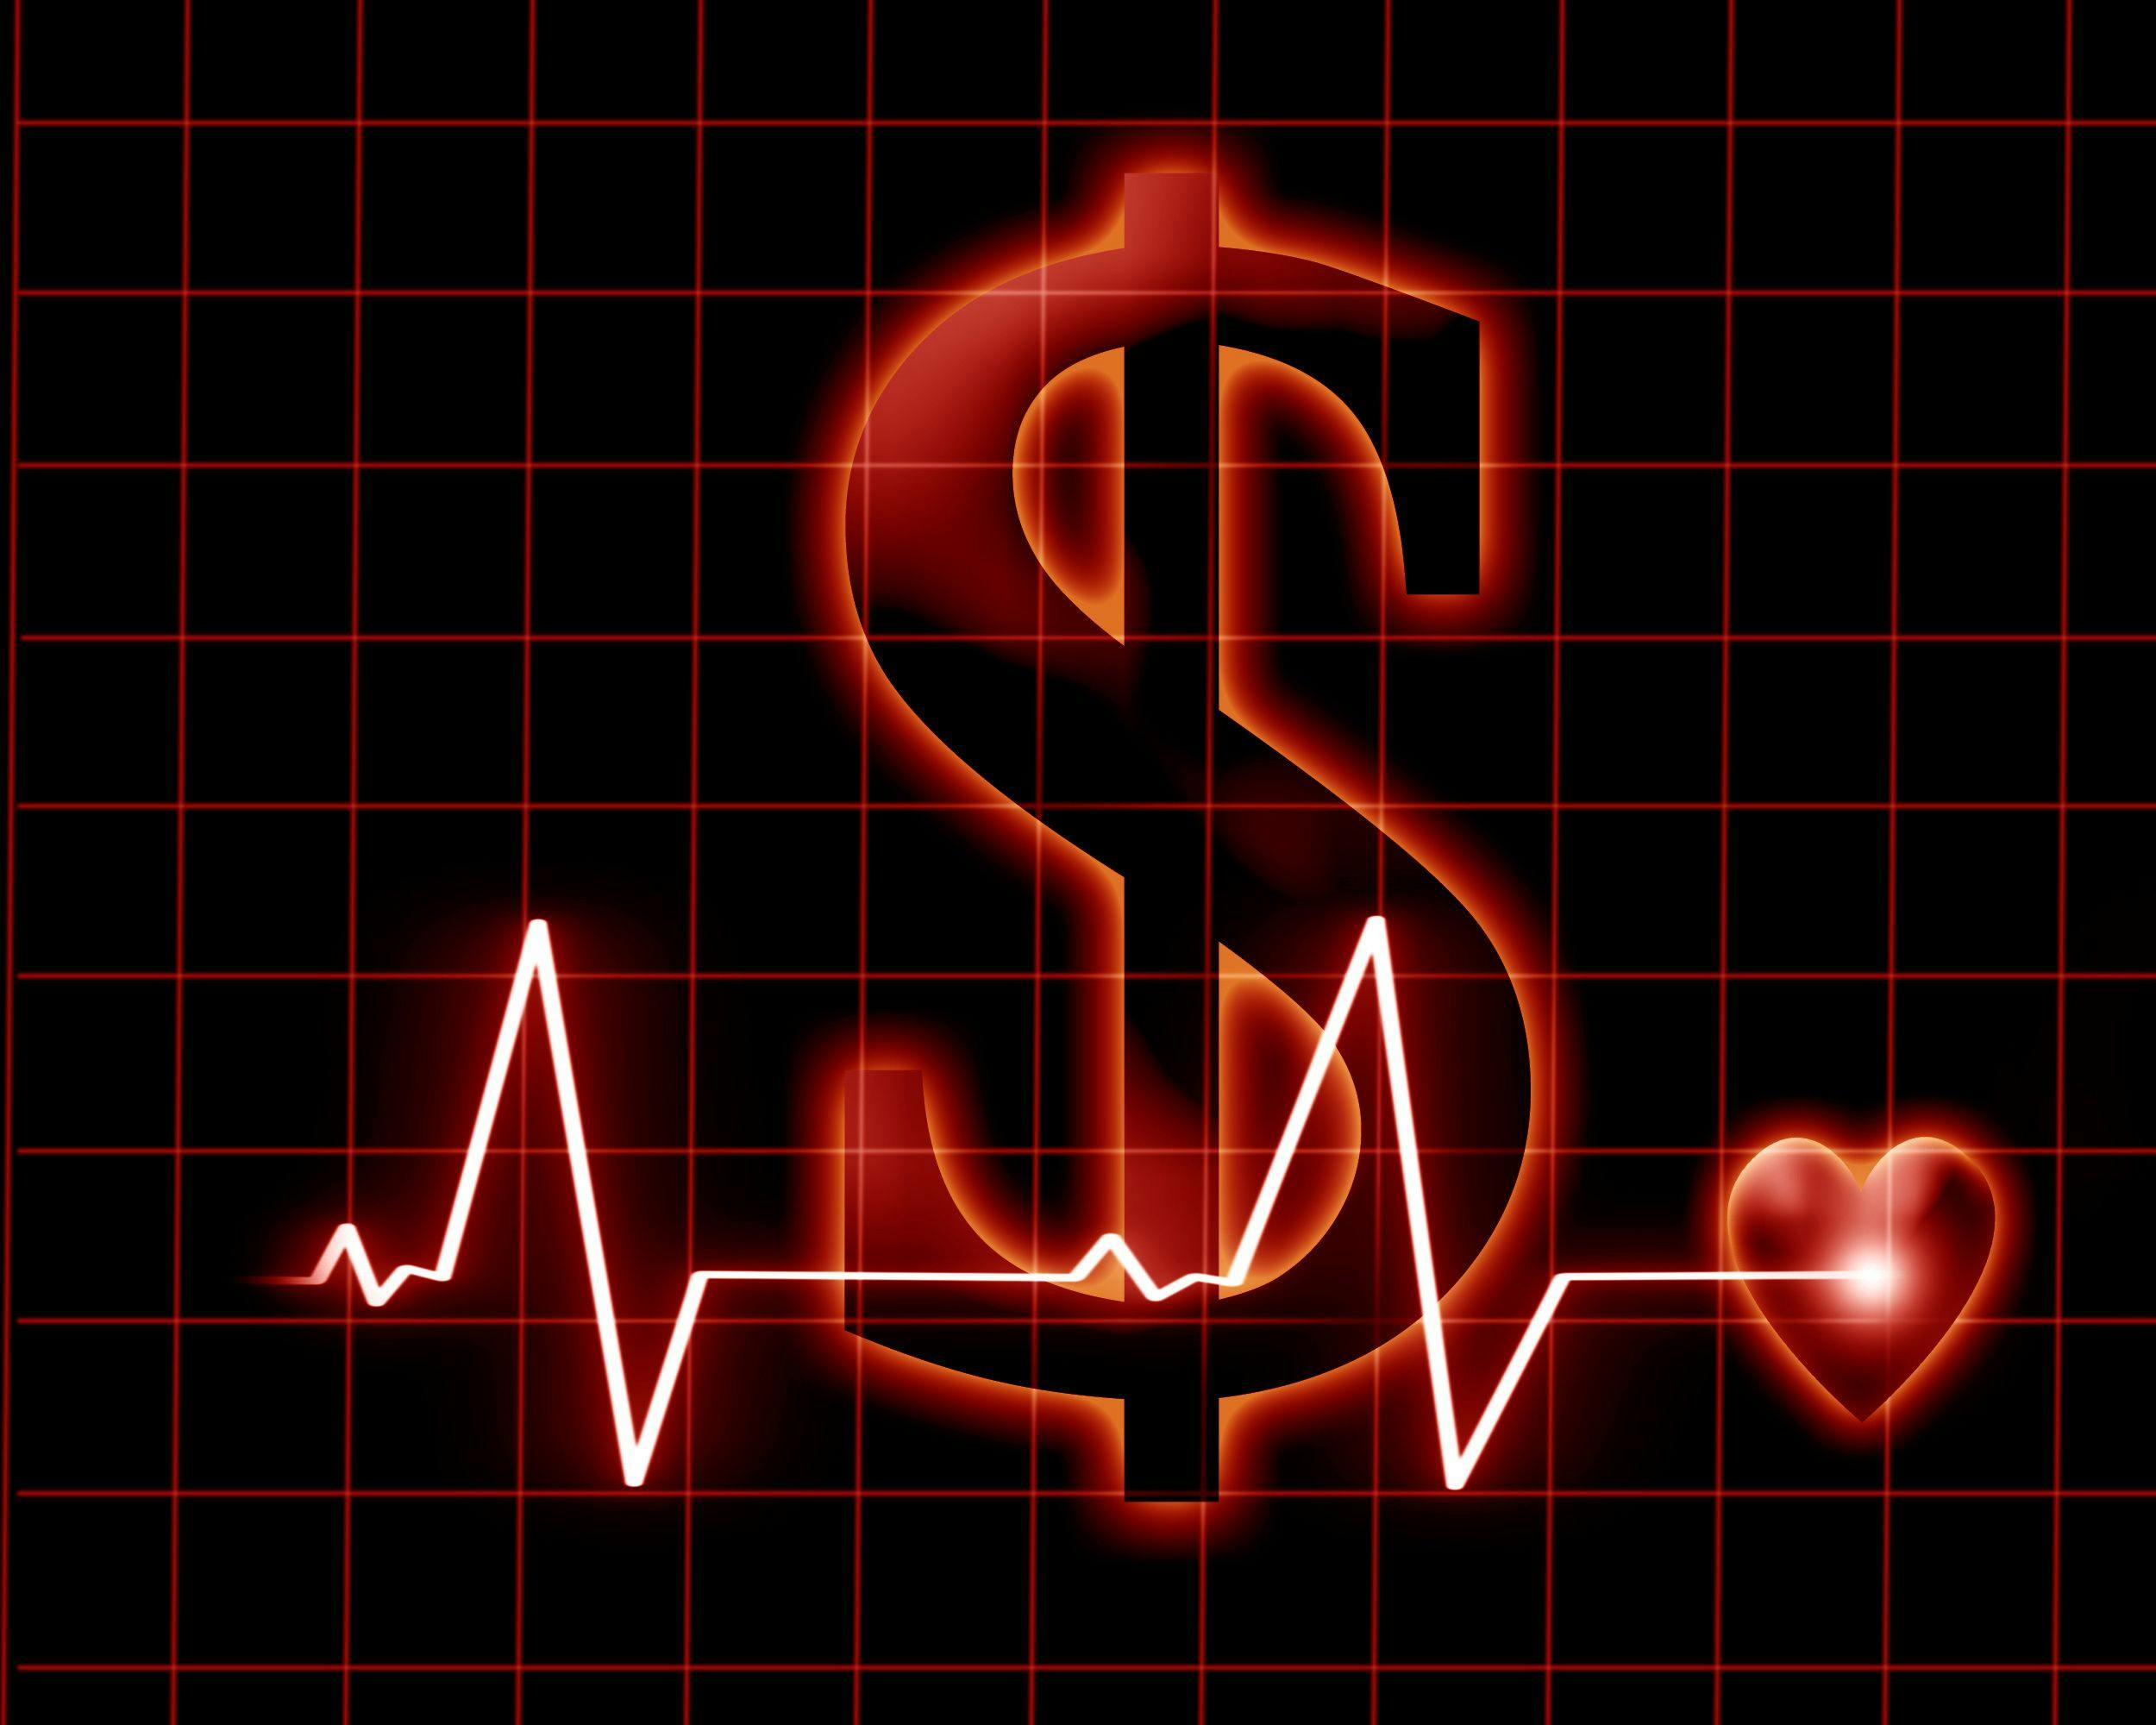 Health care costs expected to rise: ©Argus - stock.adobe.com